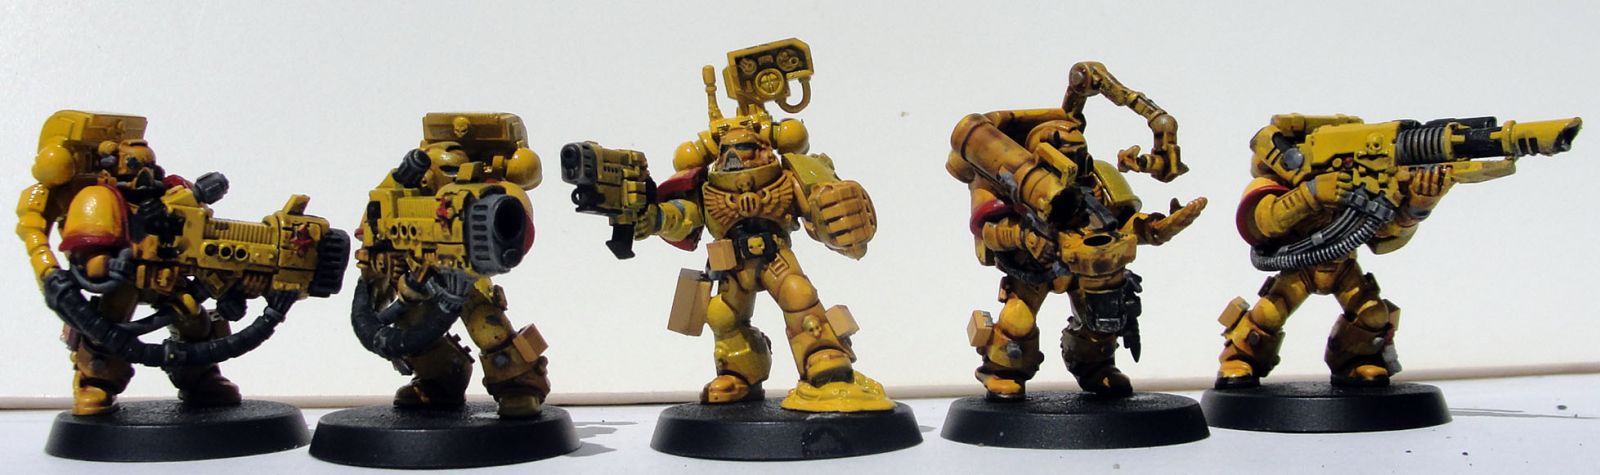 Imperial Fist Squads